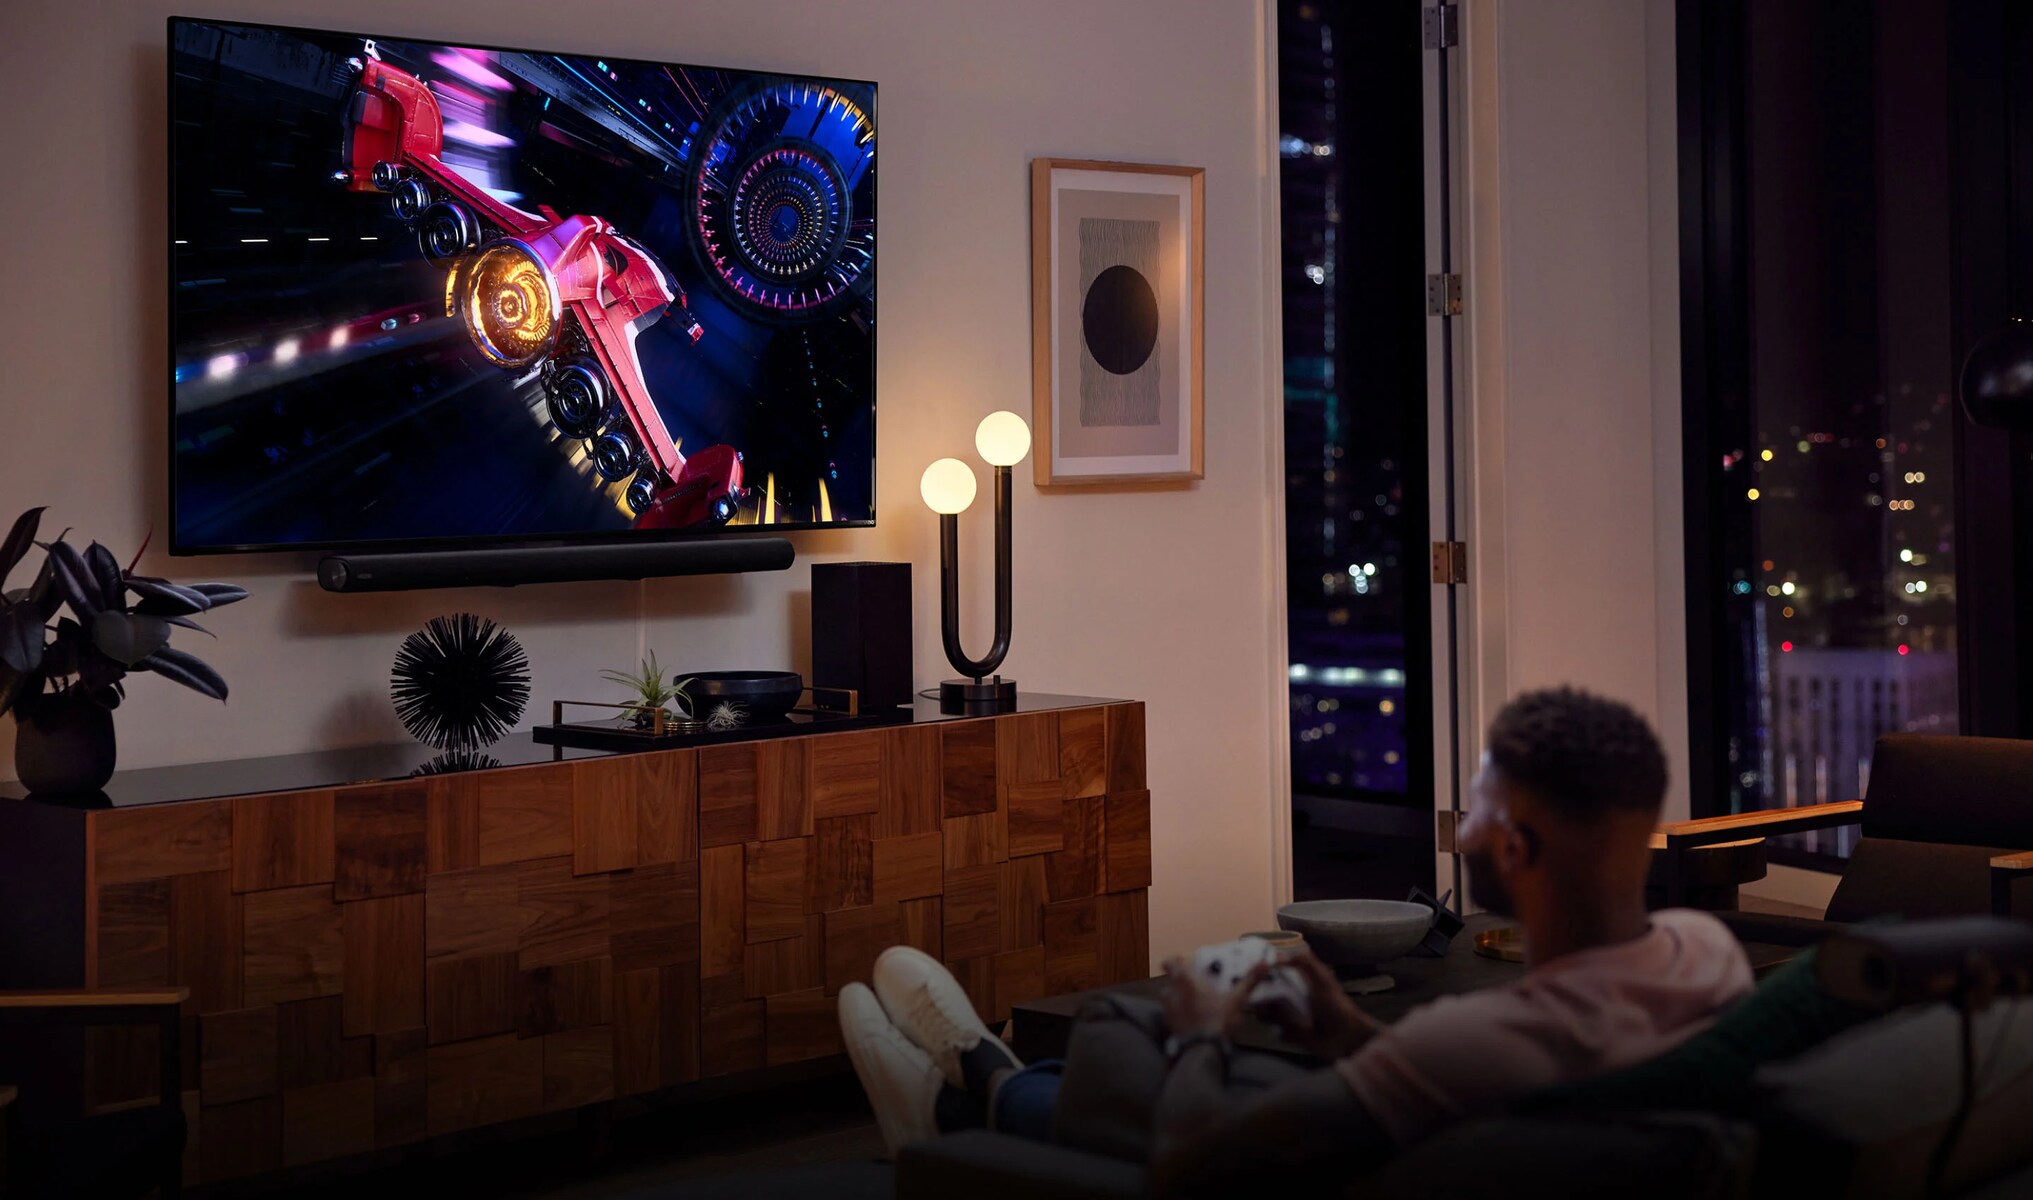 How To Connect A Surround Sound System To A Vizio Smart TV